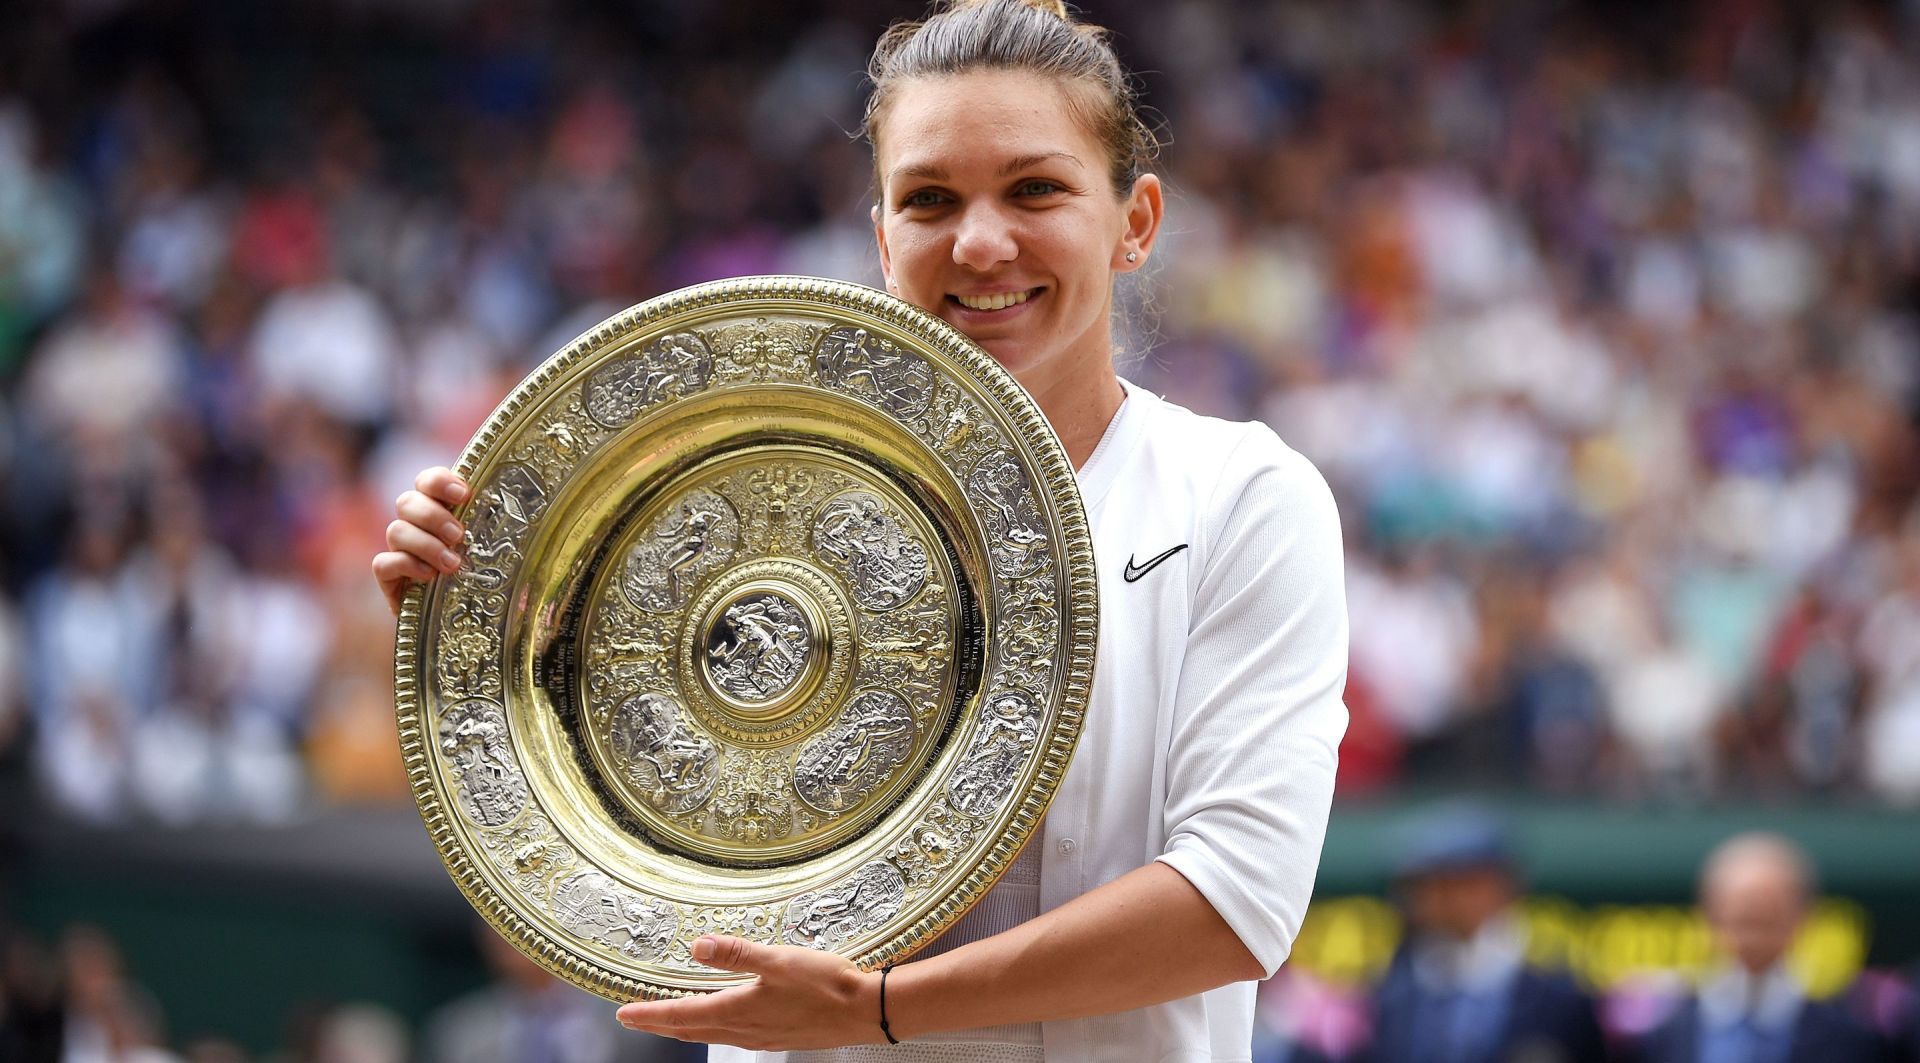 Fewest unforced errors recorded in a Grand Slam final, world record set by Simona Halep